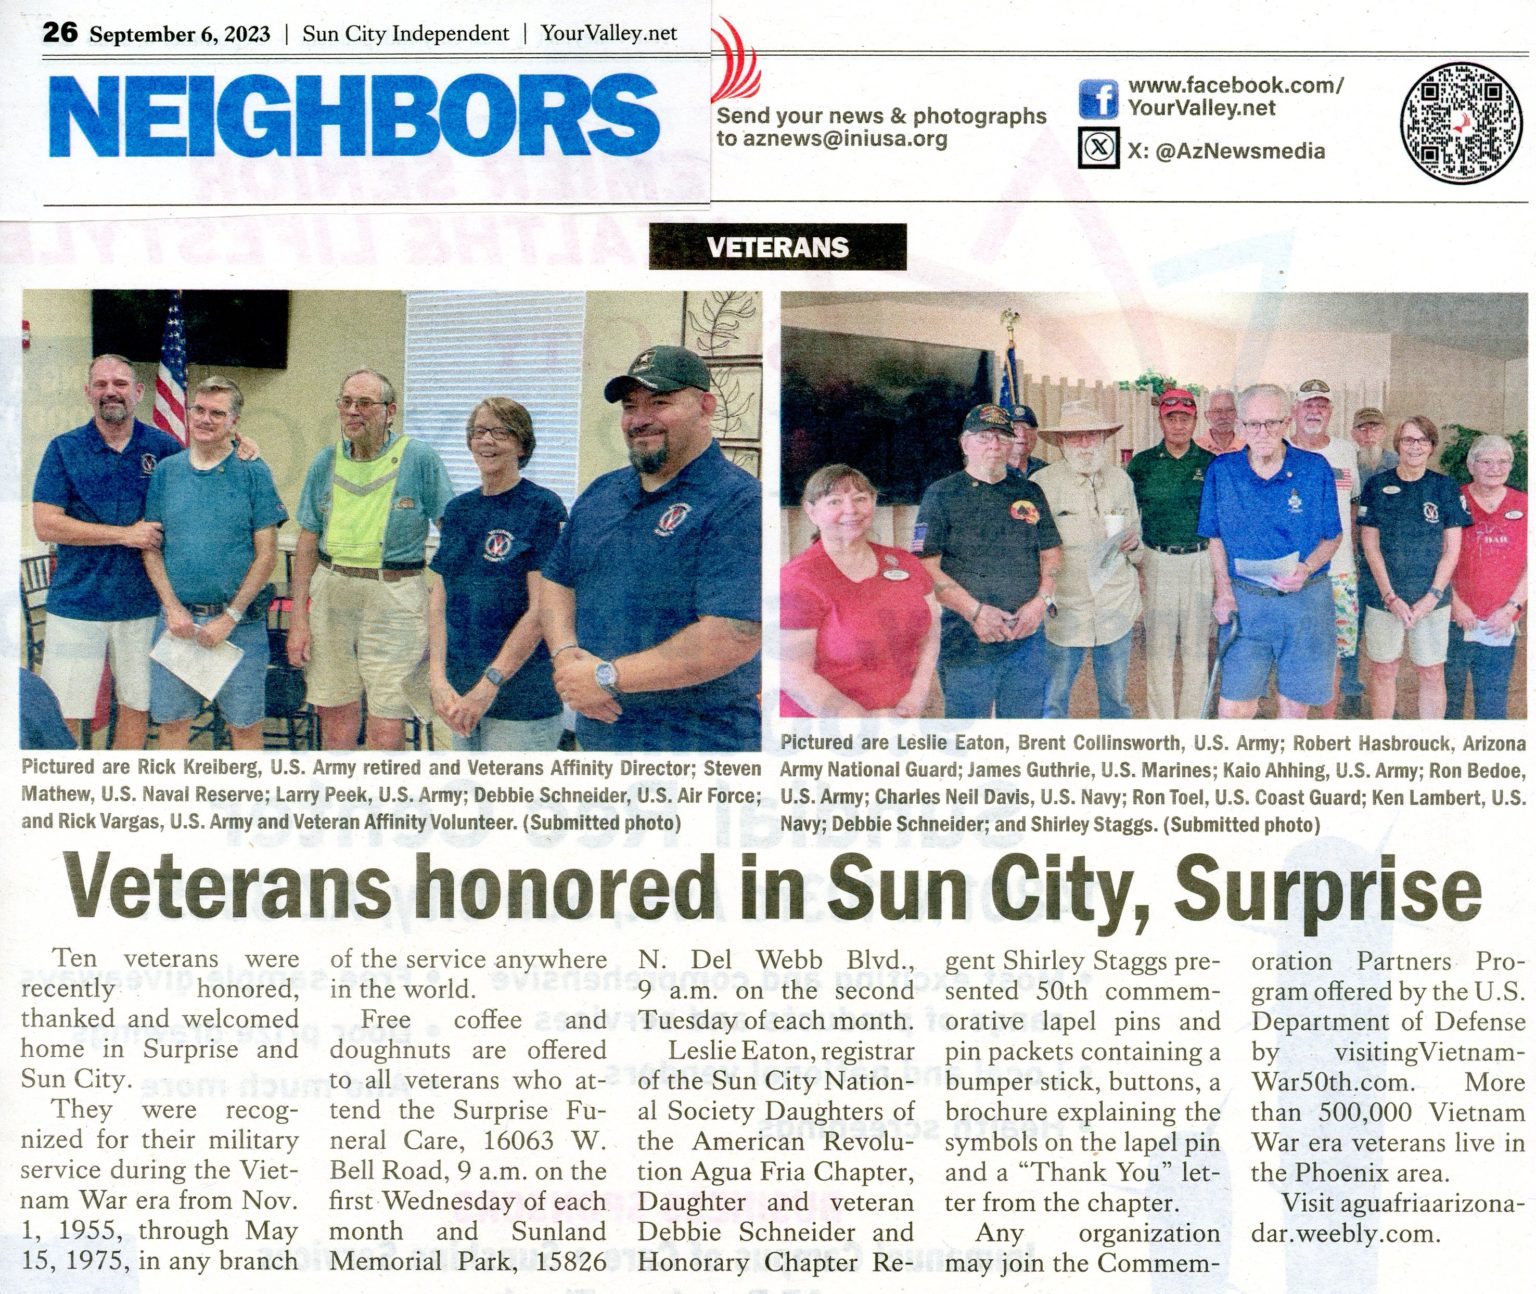 Newspaper article "Veterans honored in Sun City and Surprise"